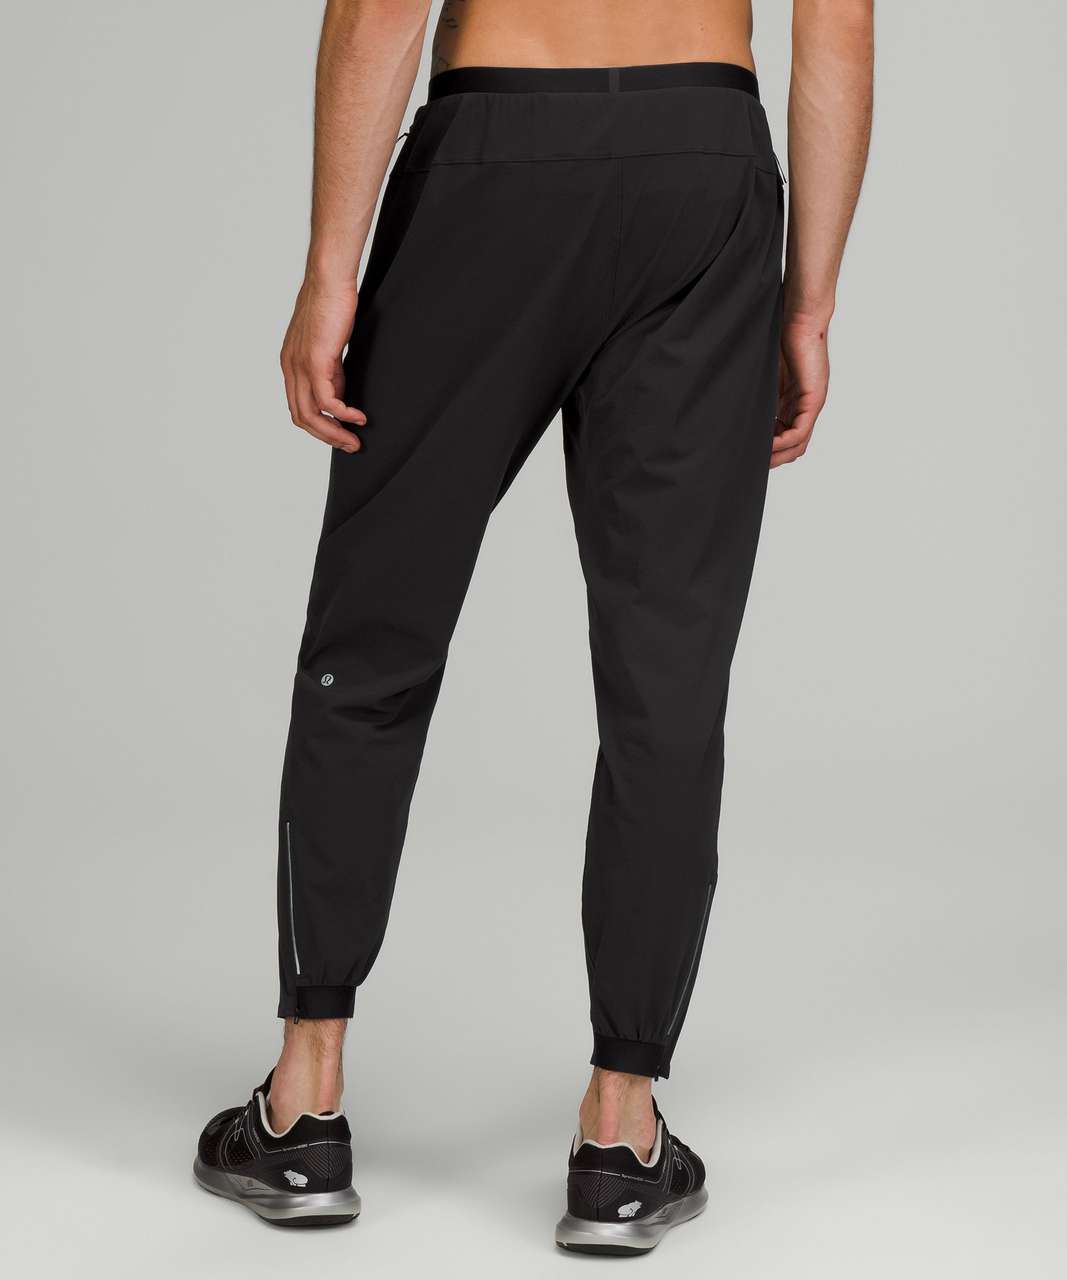 what size to get in the lulu adapted state jogger｜TikTok Search